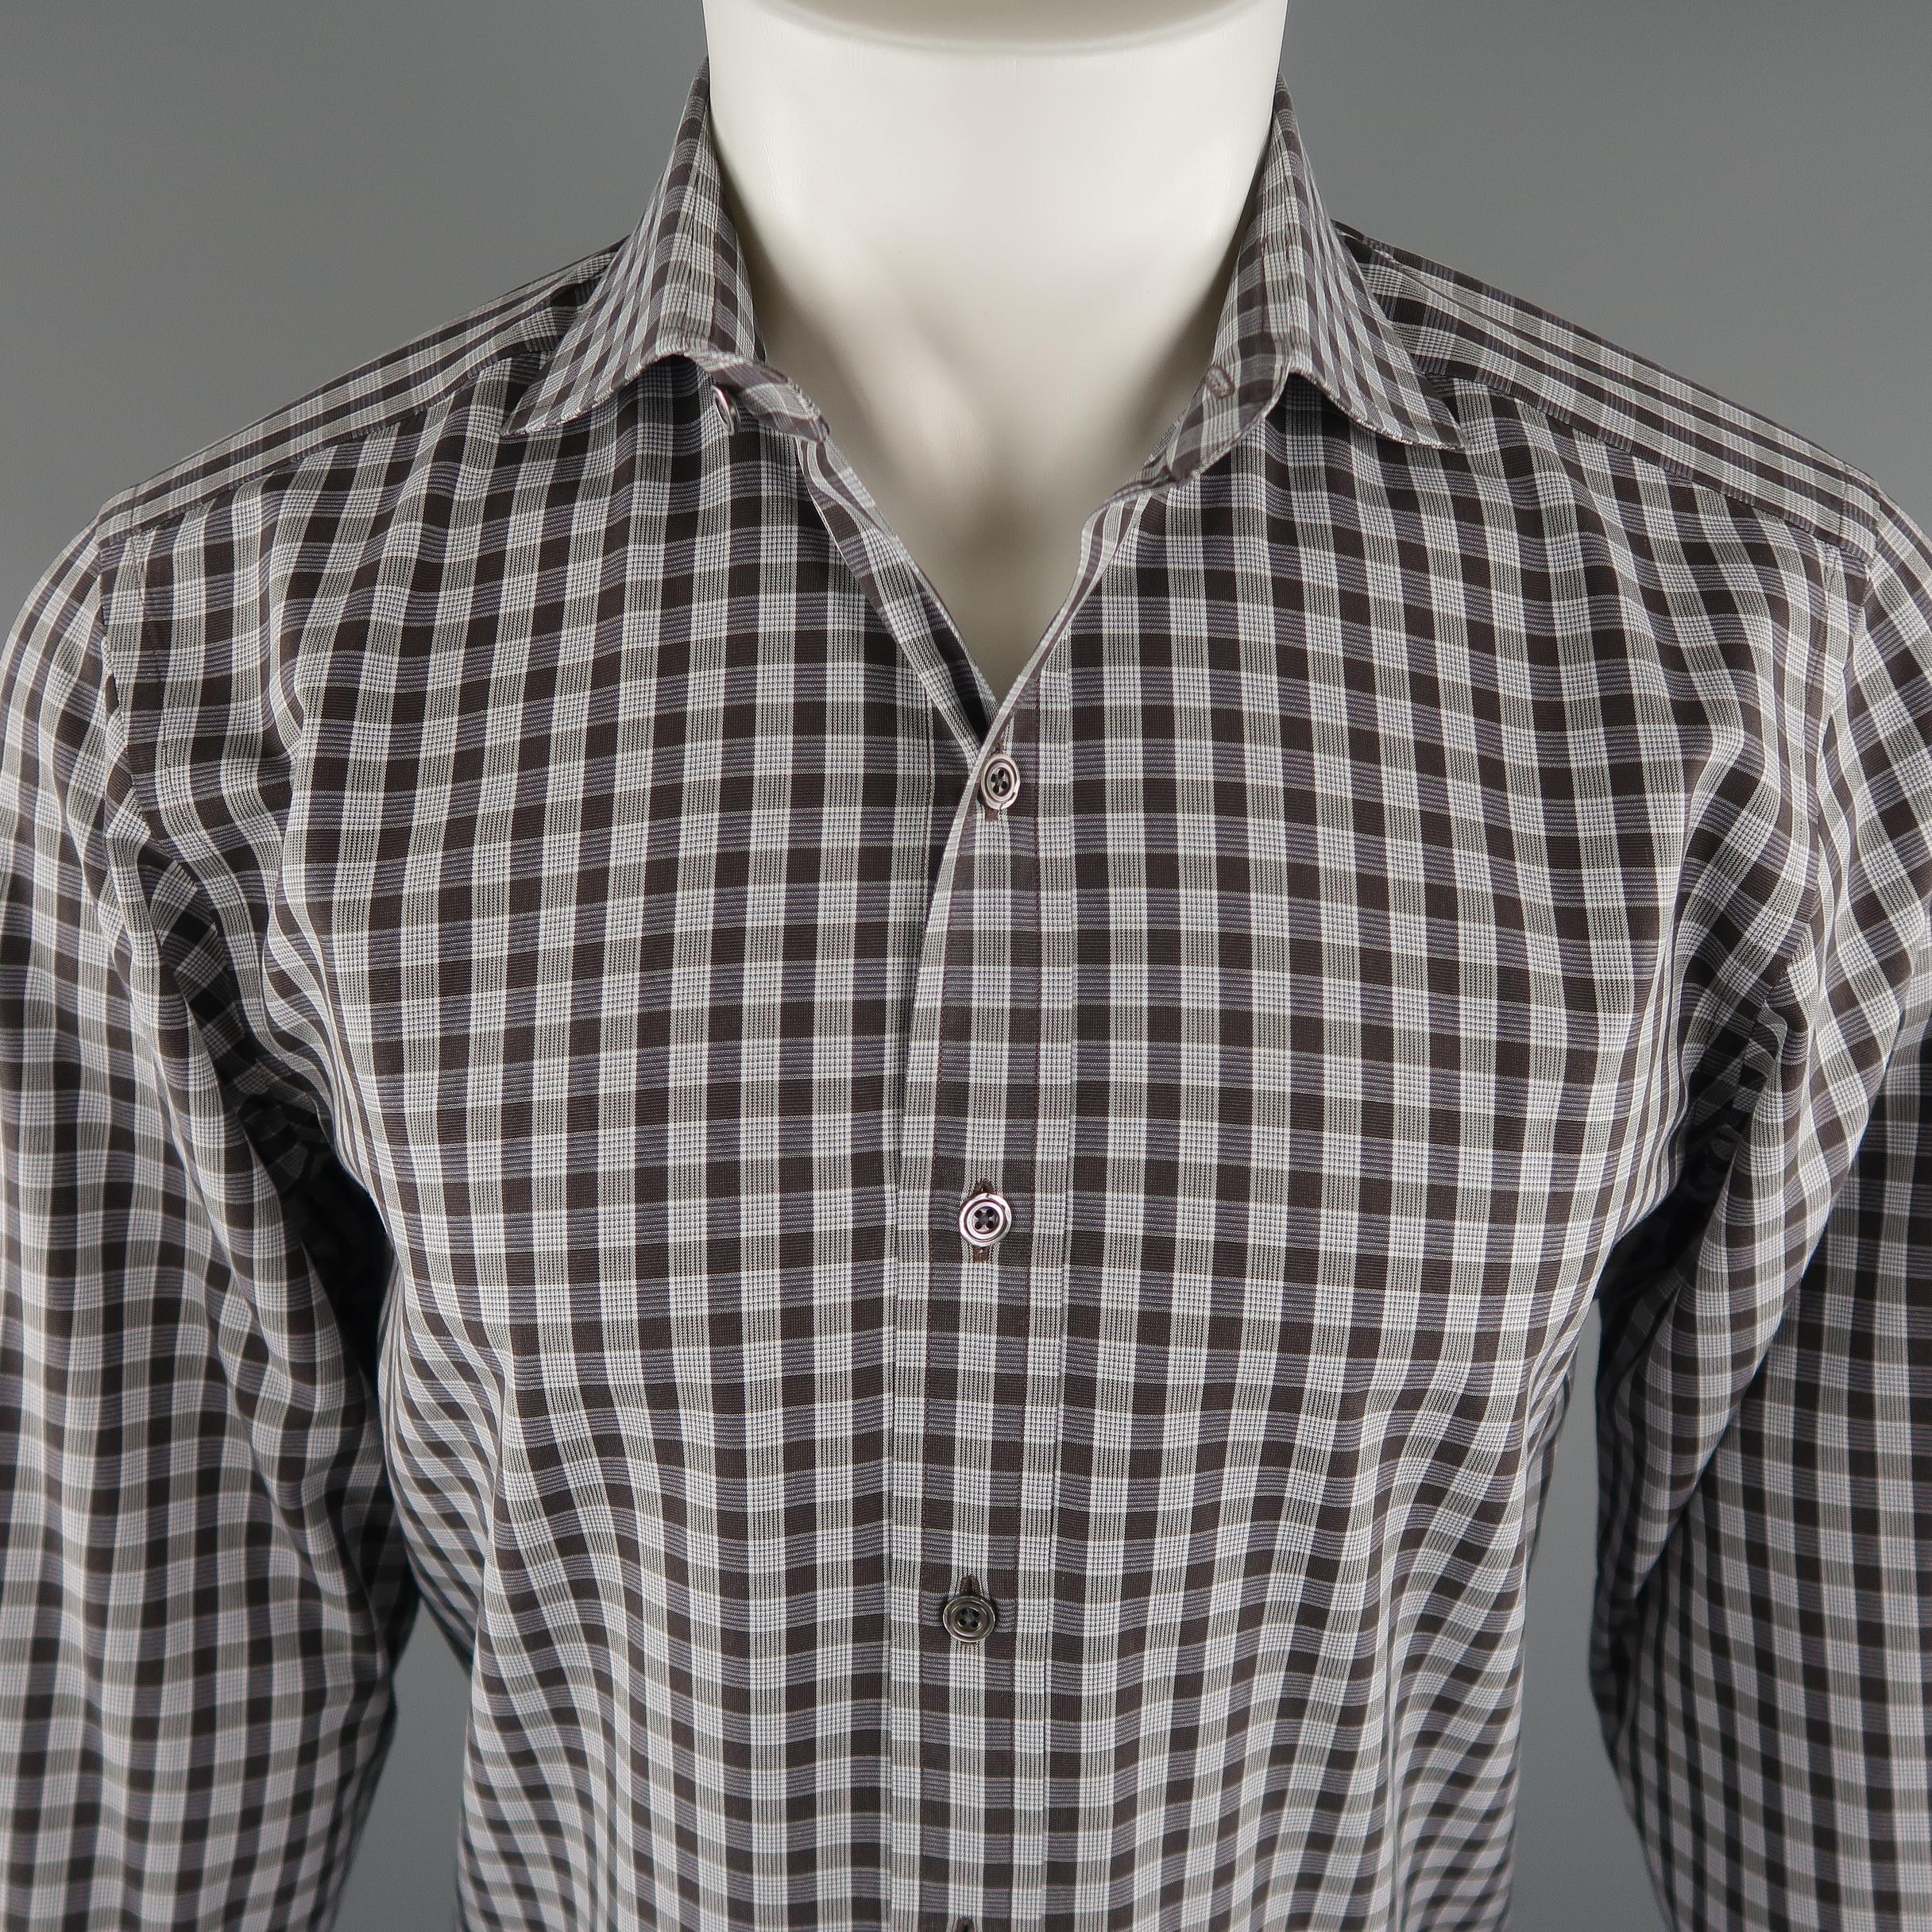 TOM FORD shirt come in white and brown tones, in a plaid cotton, button up, spread collar and long sleeves. Made in Switzerland.
 
Excellent Pre-Owned Condition.
Marked: 40 IT
 
Measurements:
 
Shoulder: 16 in.
Chest: 42 in.
Sleeve: 26 in.
Length: